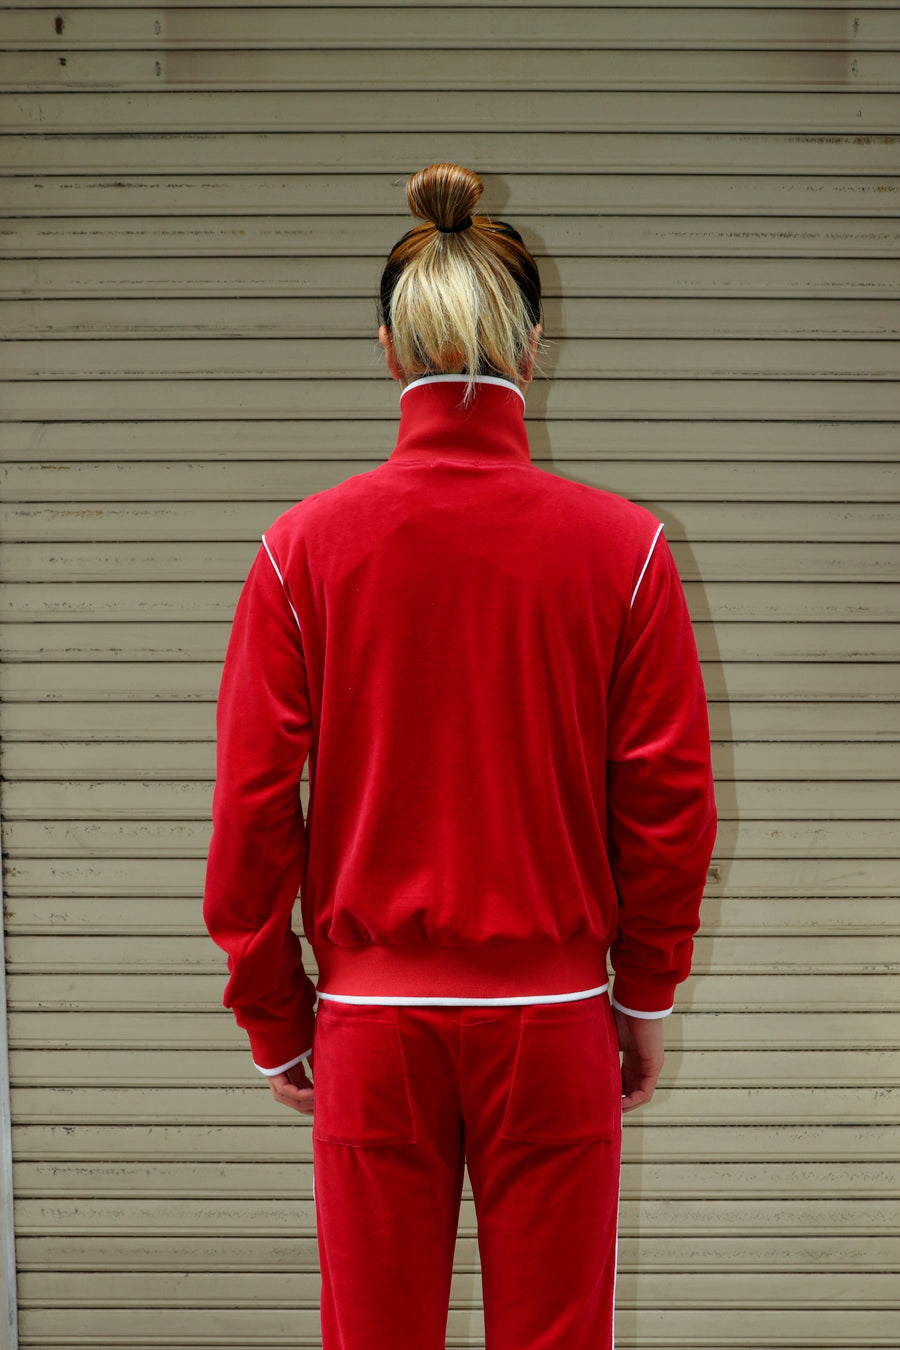 LITTLEBIG  Track Top-1(Red or Green)